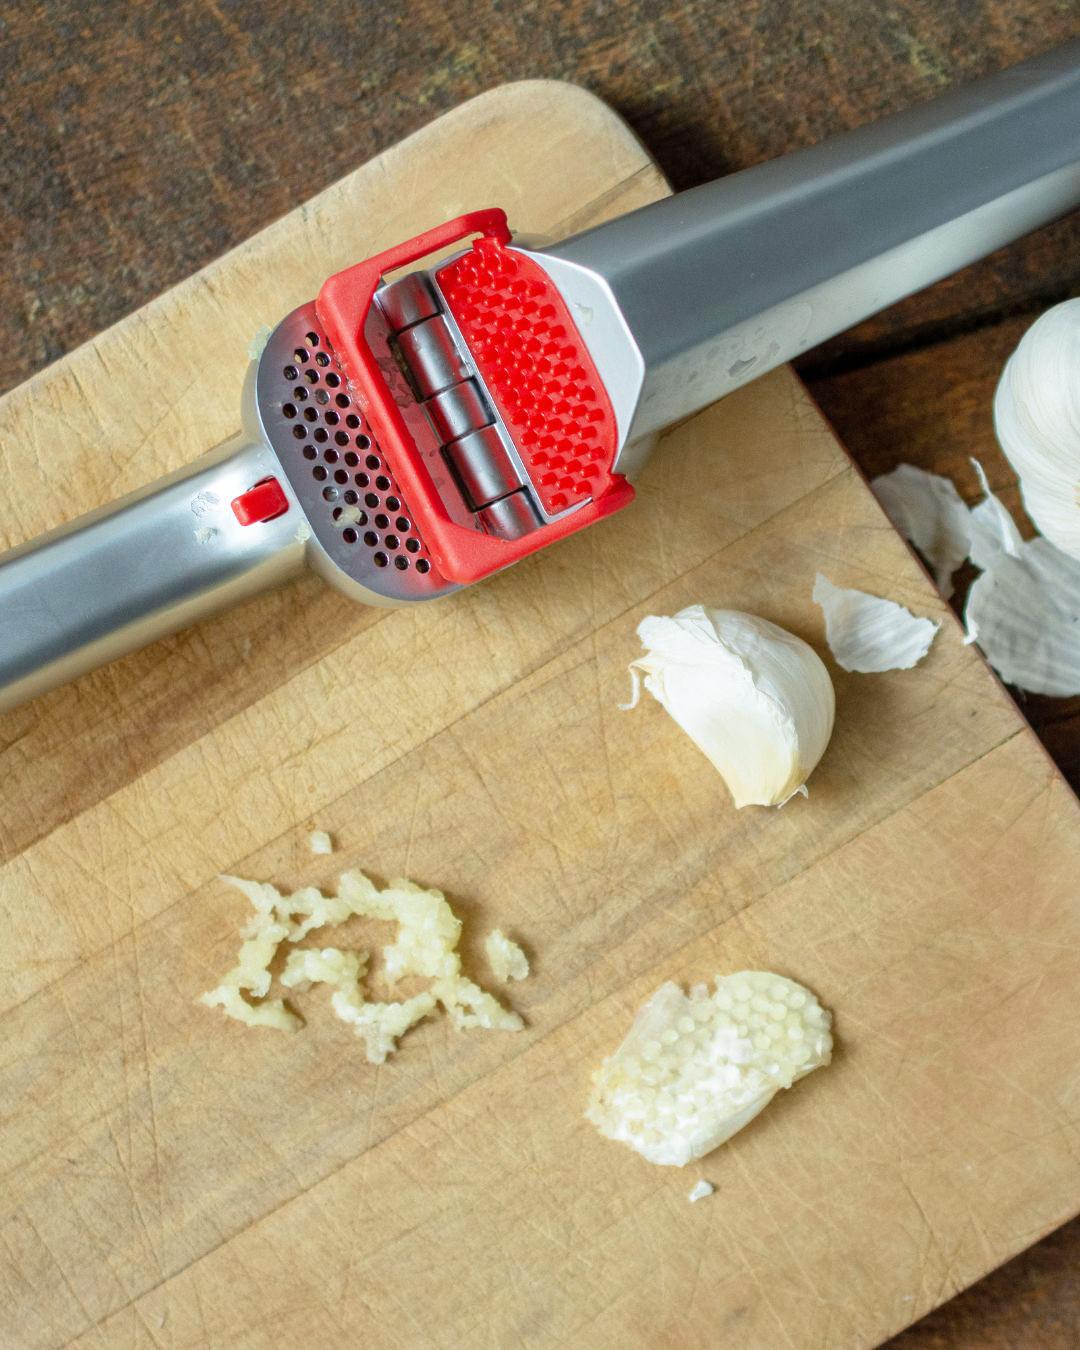 When using a garlic press, you do NOT need to peel the clove first